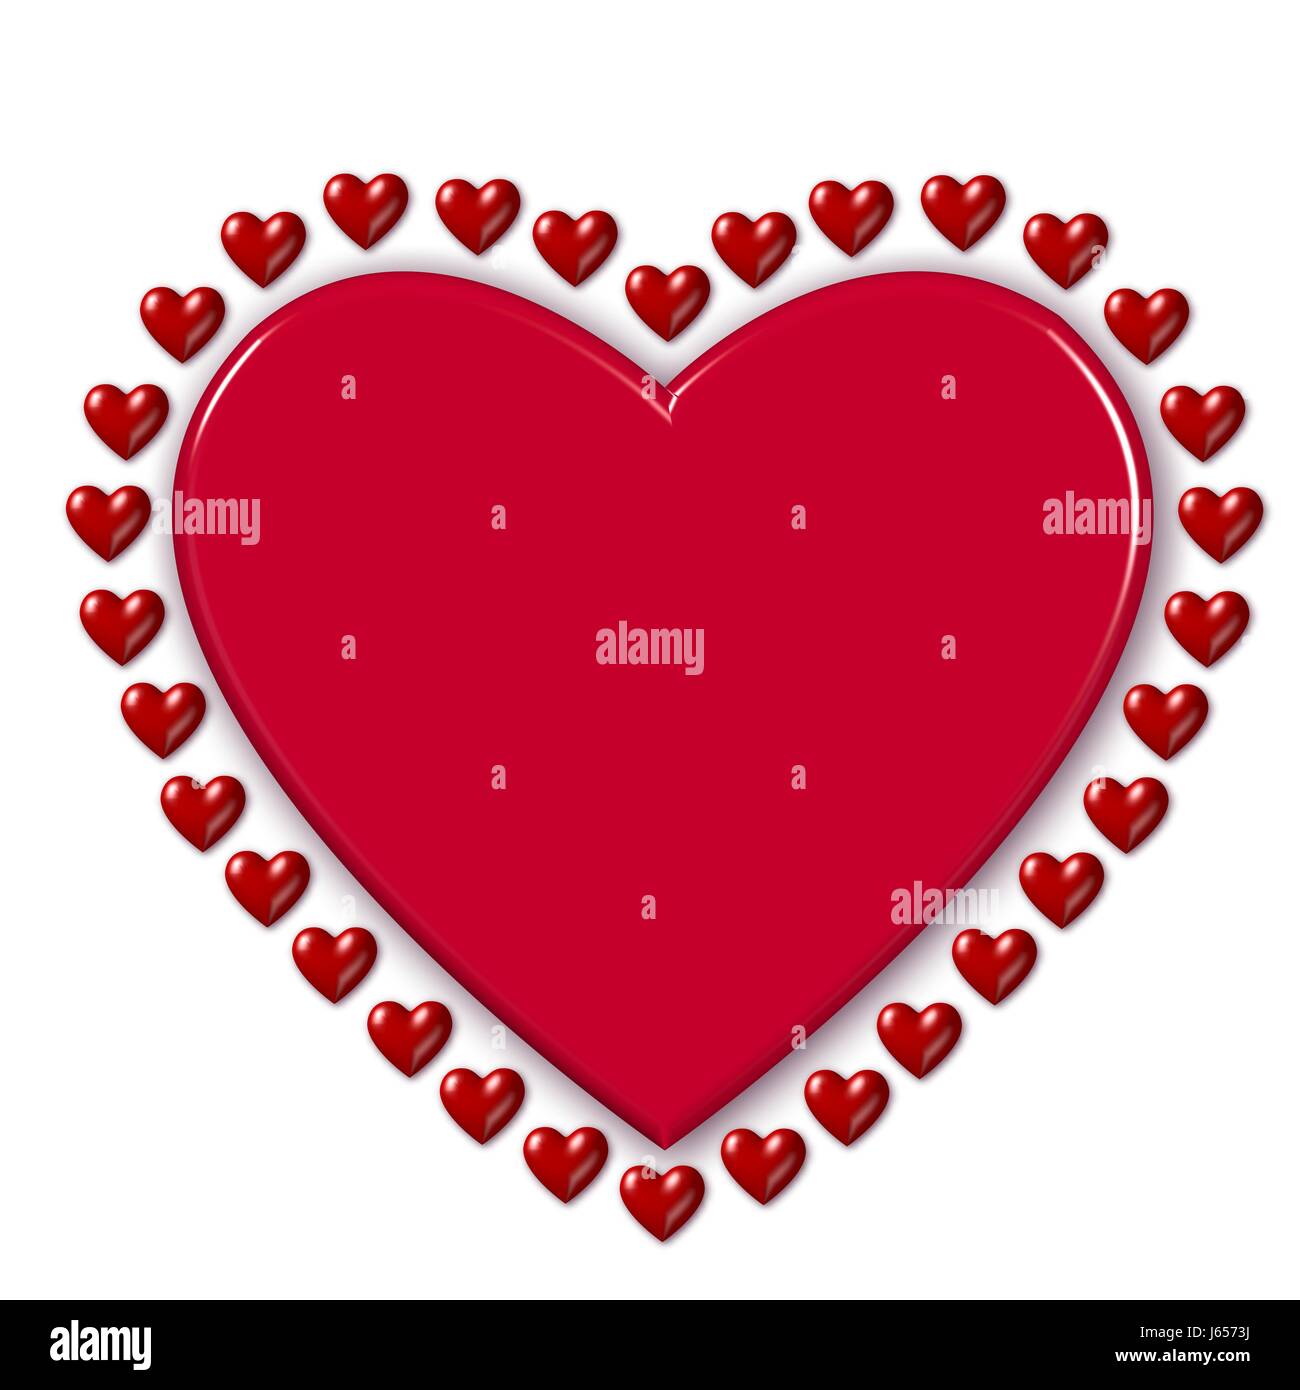 feeling affection partnership love in love fell in love heart sign signal Stock Photo